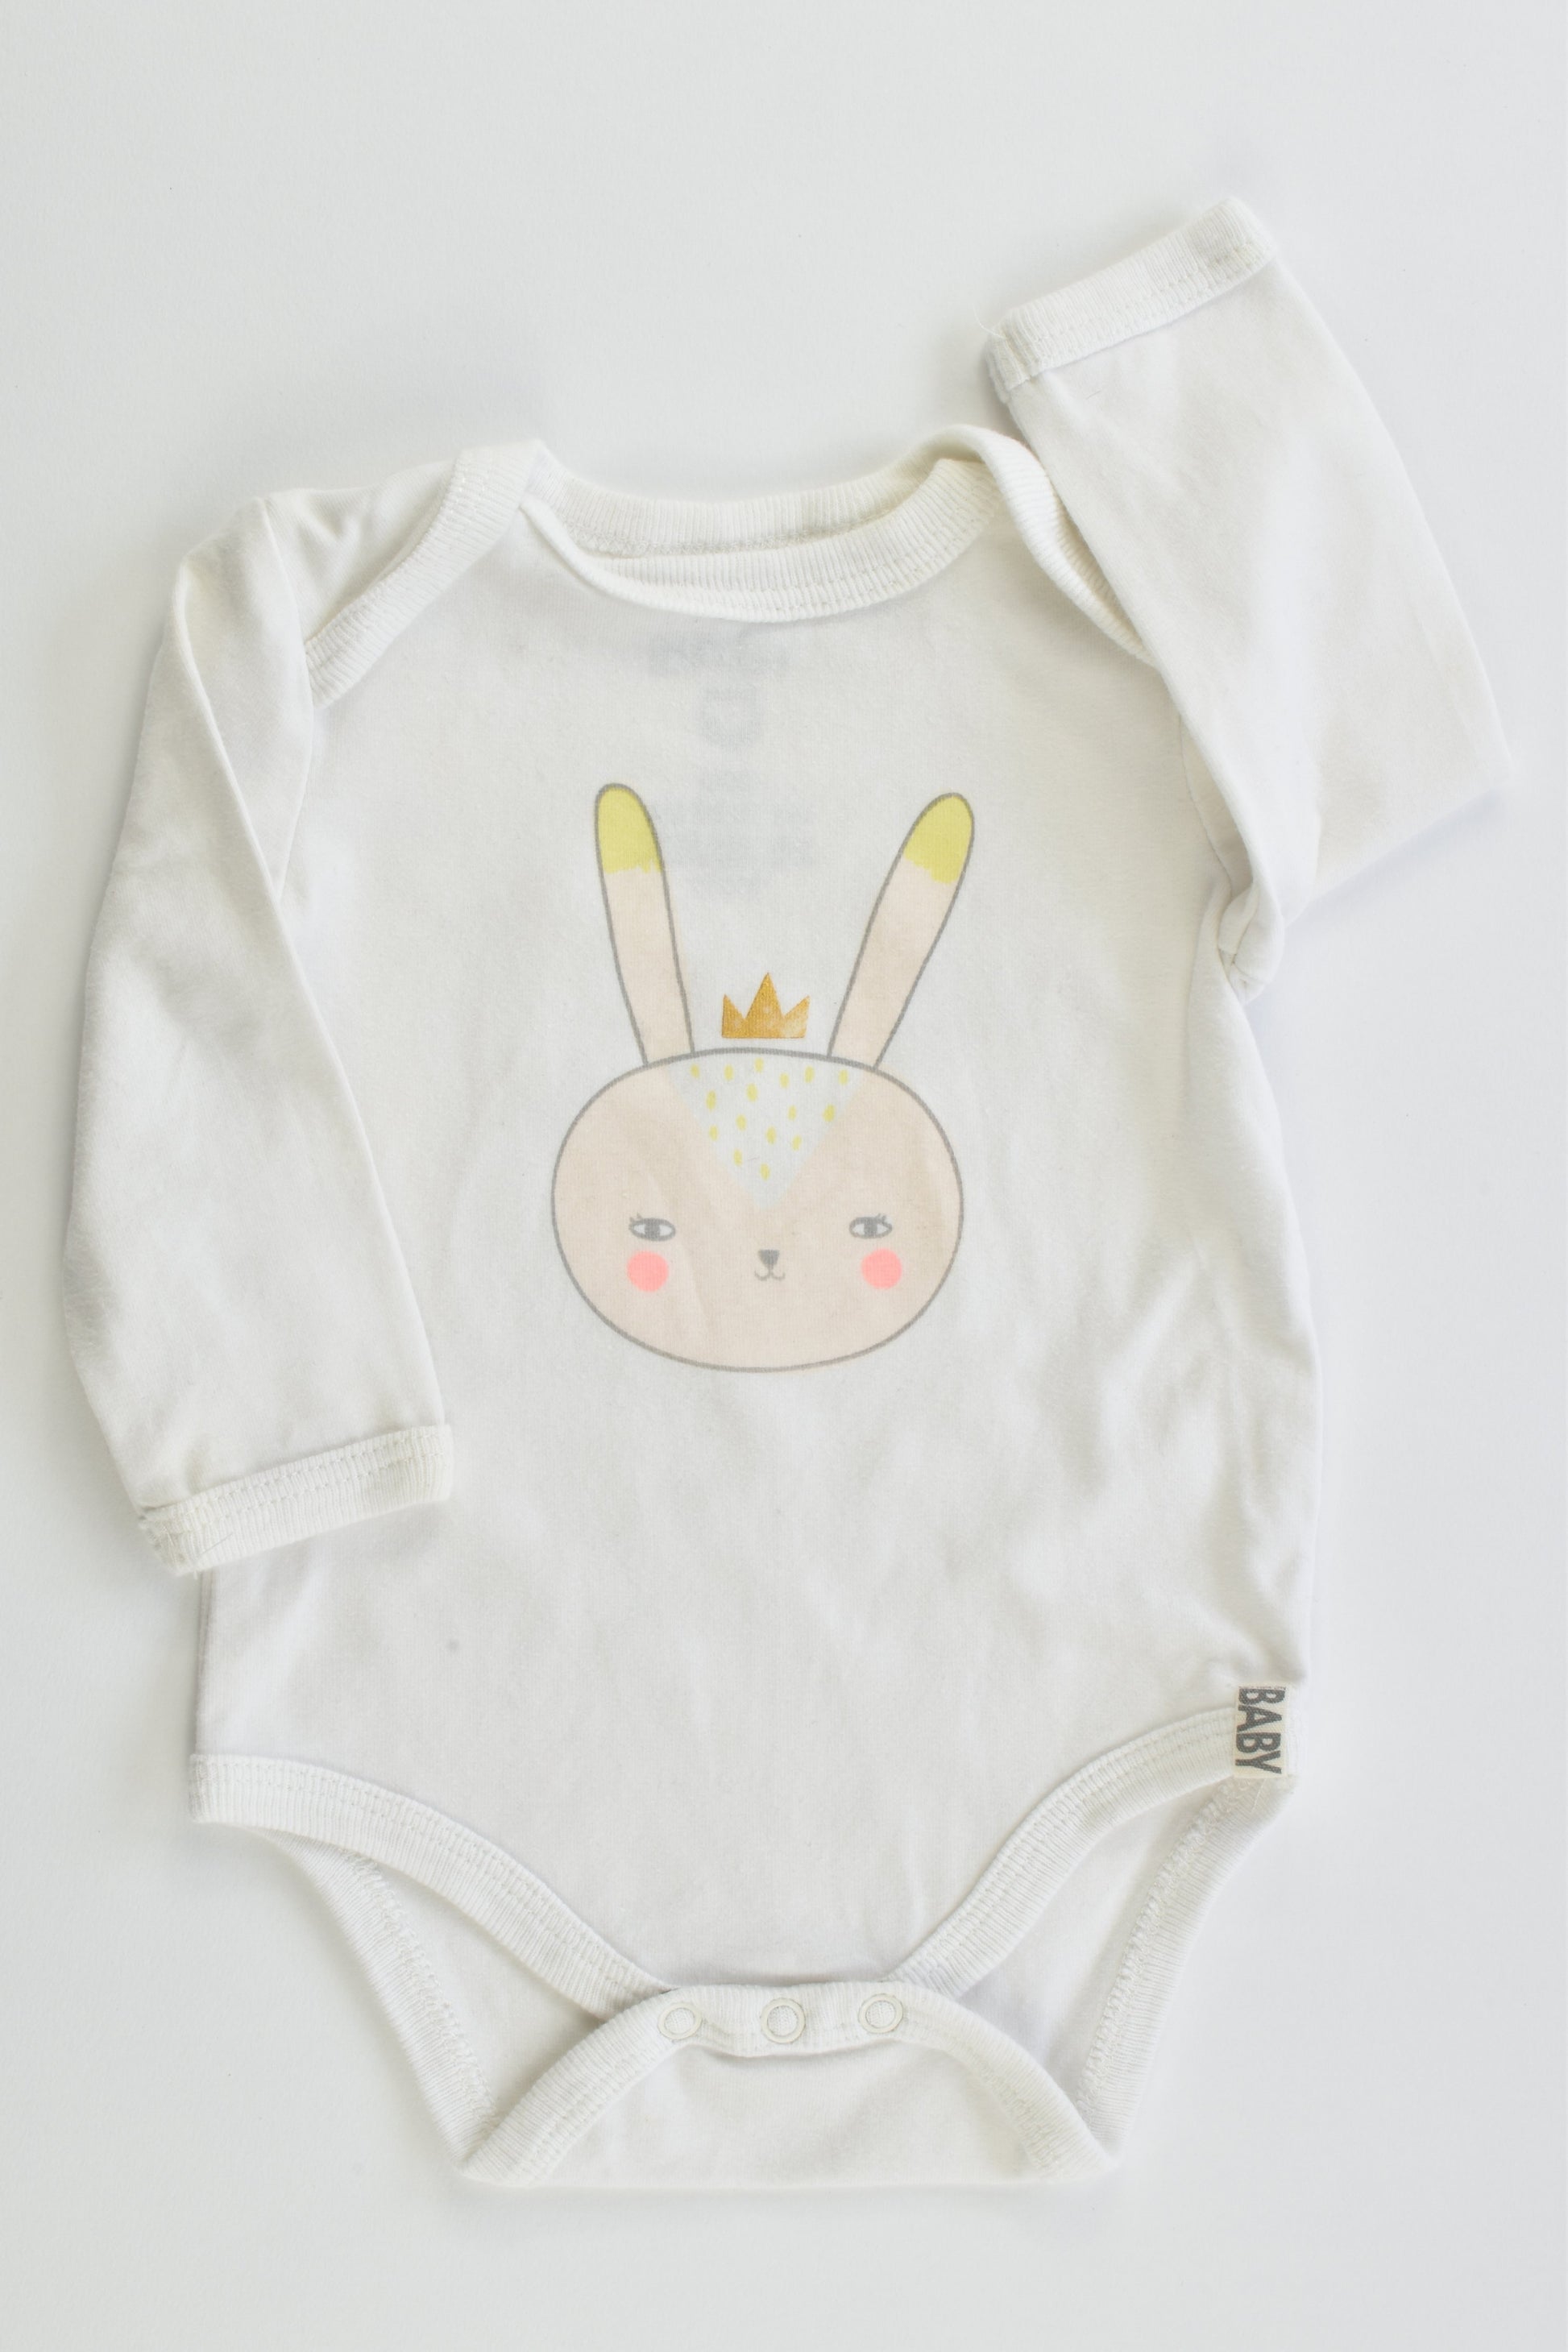 Cotton On Baby Size 000 (0-3 months, 62 cm) Bunny Bodysuit